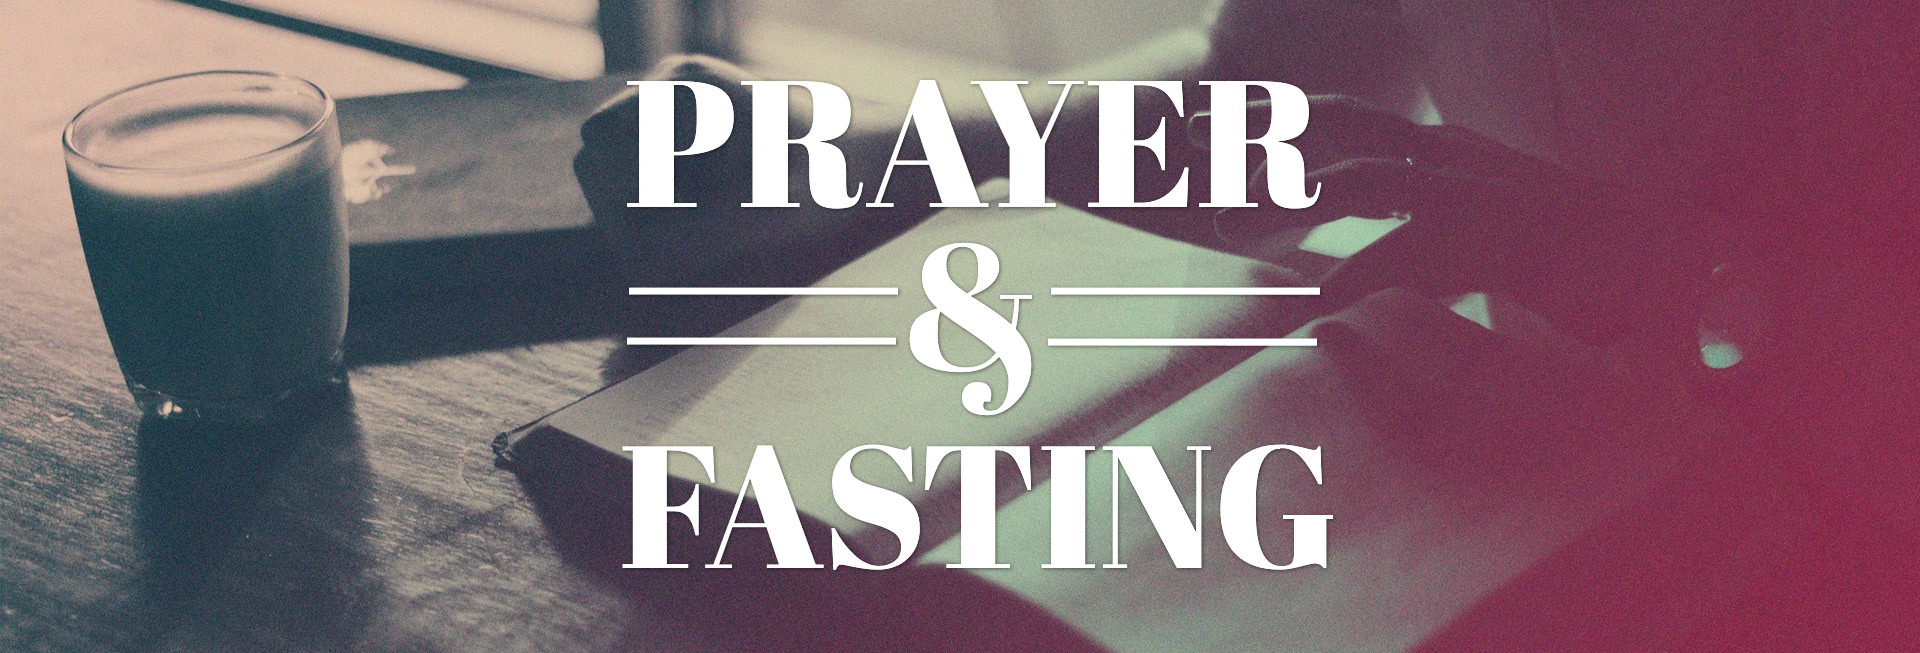 Prayer And Fasting Church Website Banner